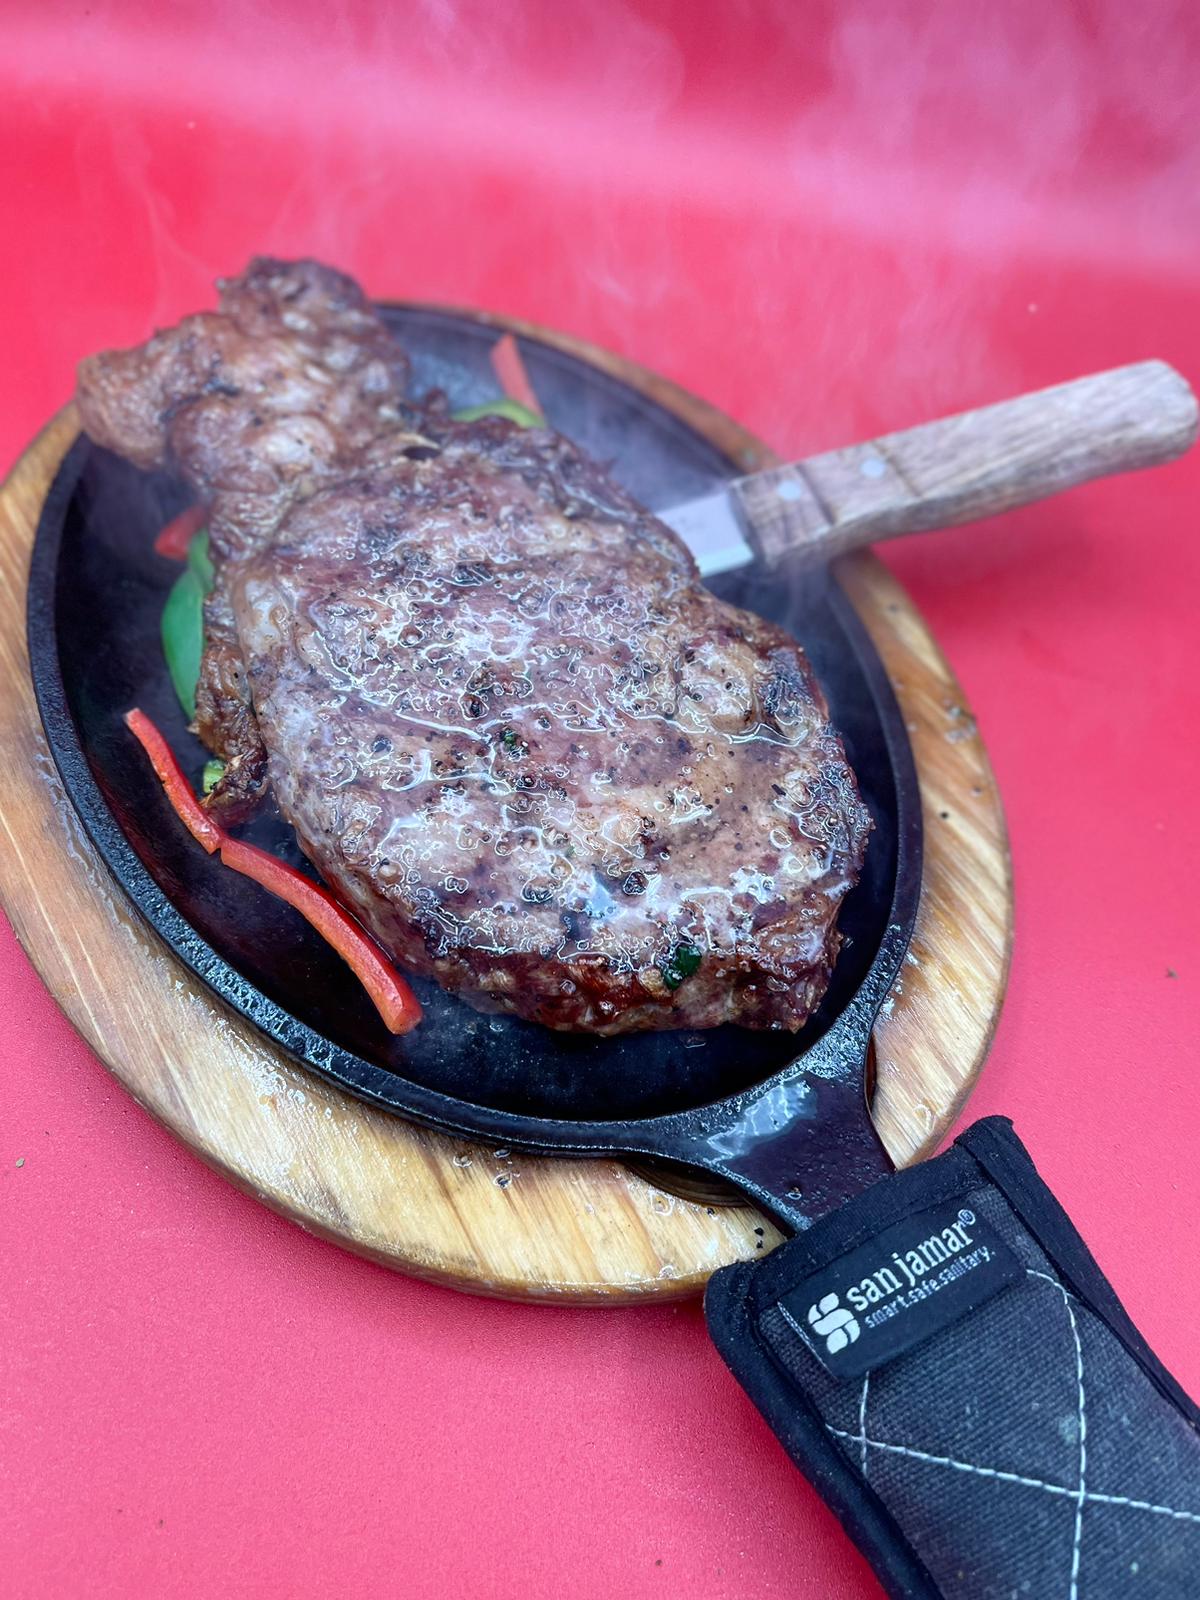 A steak is being cooked in a skillet on a red table.